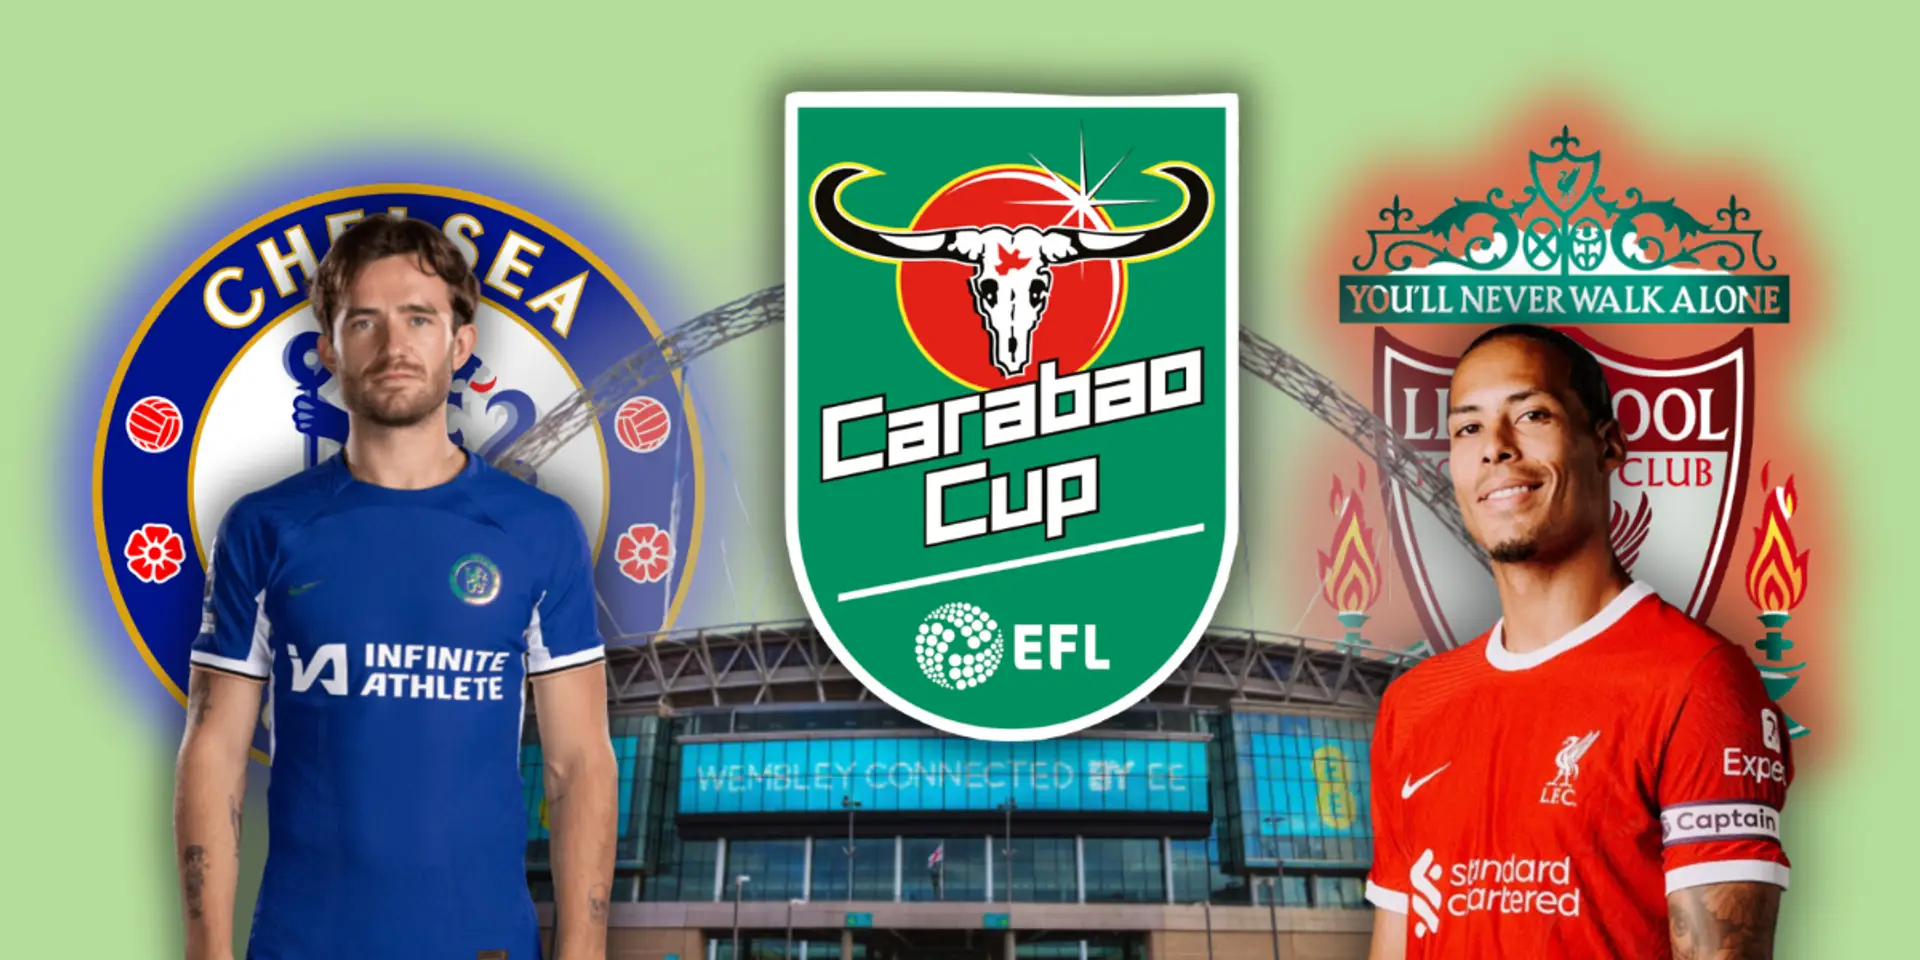 Football fiesta at Wembley: Chelsea vs Liverpool in Epic Carabao Cup Final